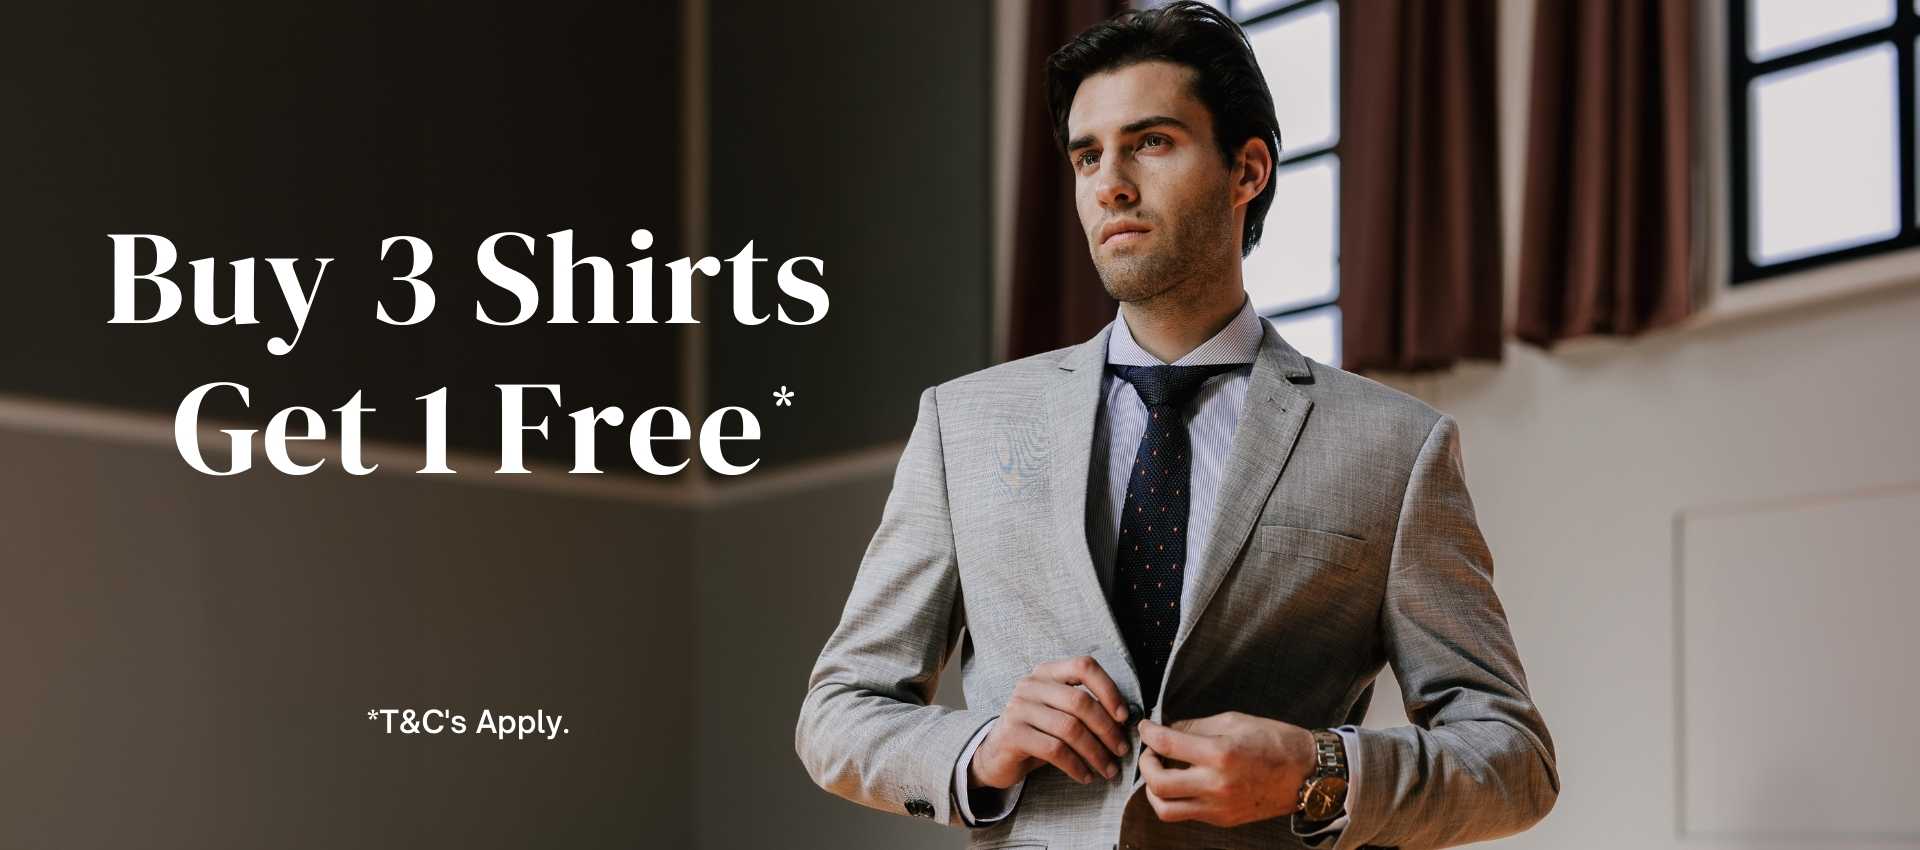 Collection of Limited Edition Shirts for Men from Dandy & Son. Image of a man wearing a Extreme Cutaway Collar Shirt from Dandy & Son. Buy 3 Shirts, get 1 Free.